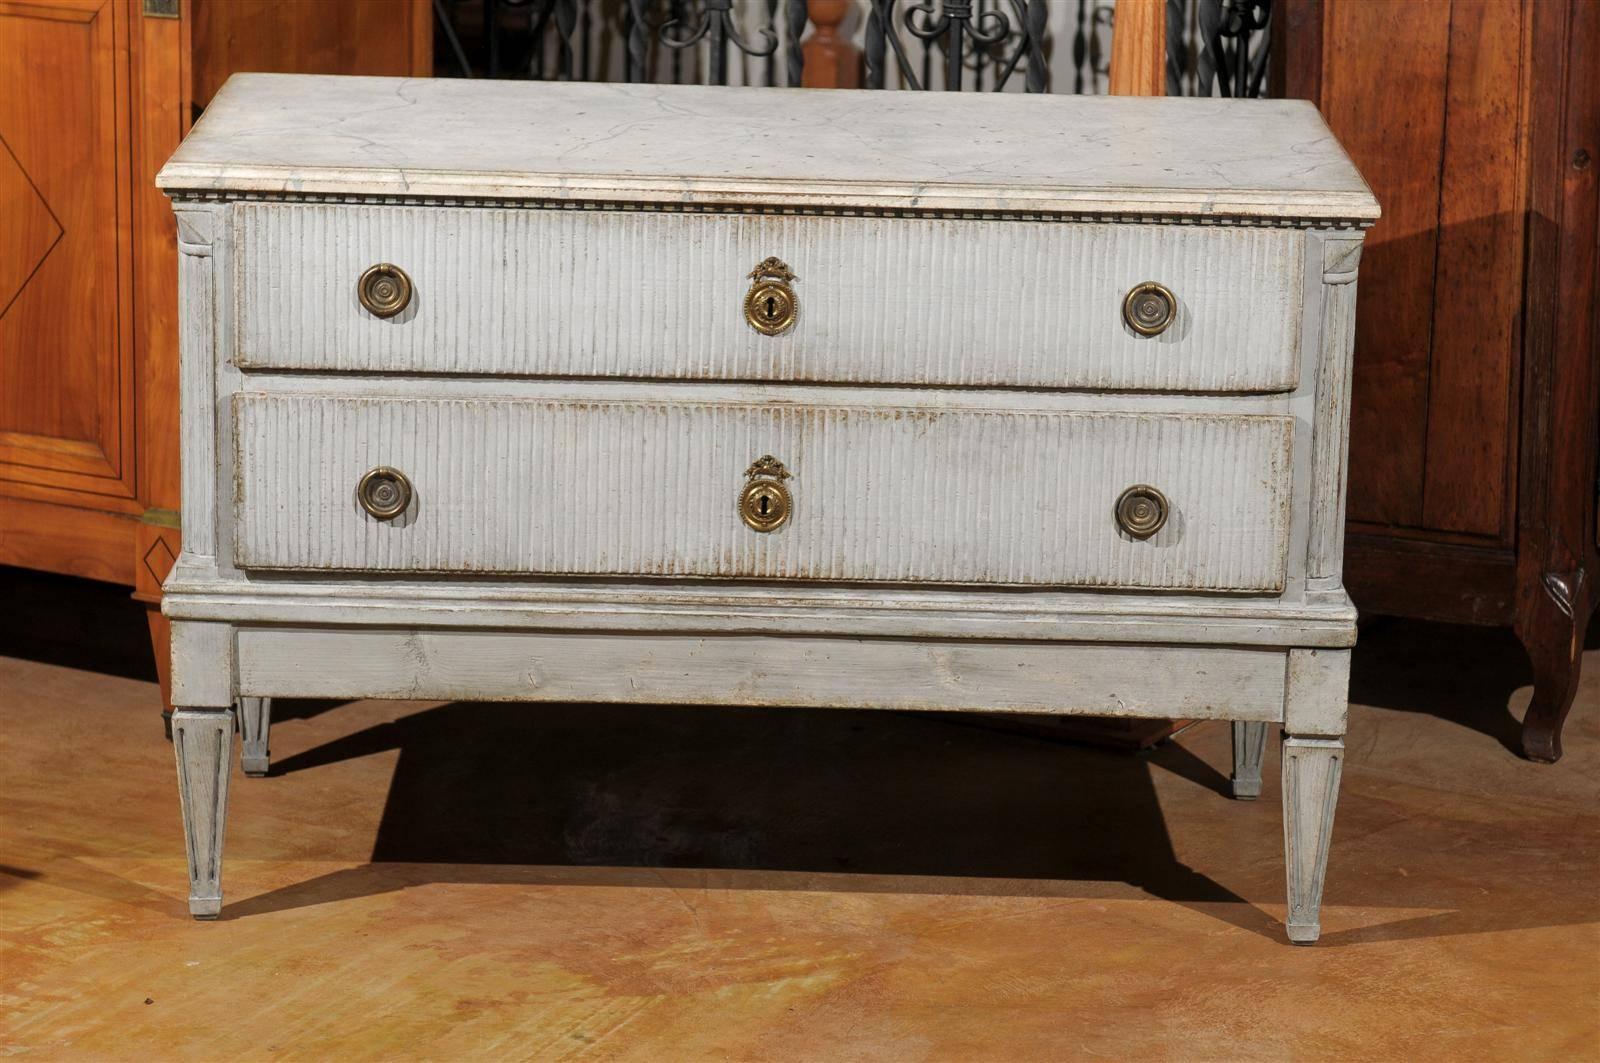 Late 18th Century Gustavian Period Two-Drawer Painted Commode with Reeded Motifs 2